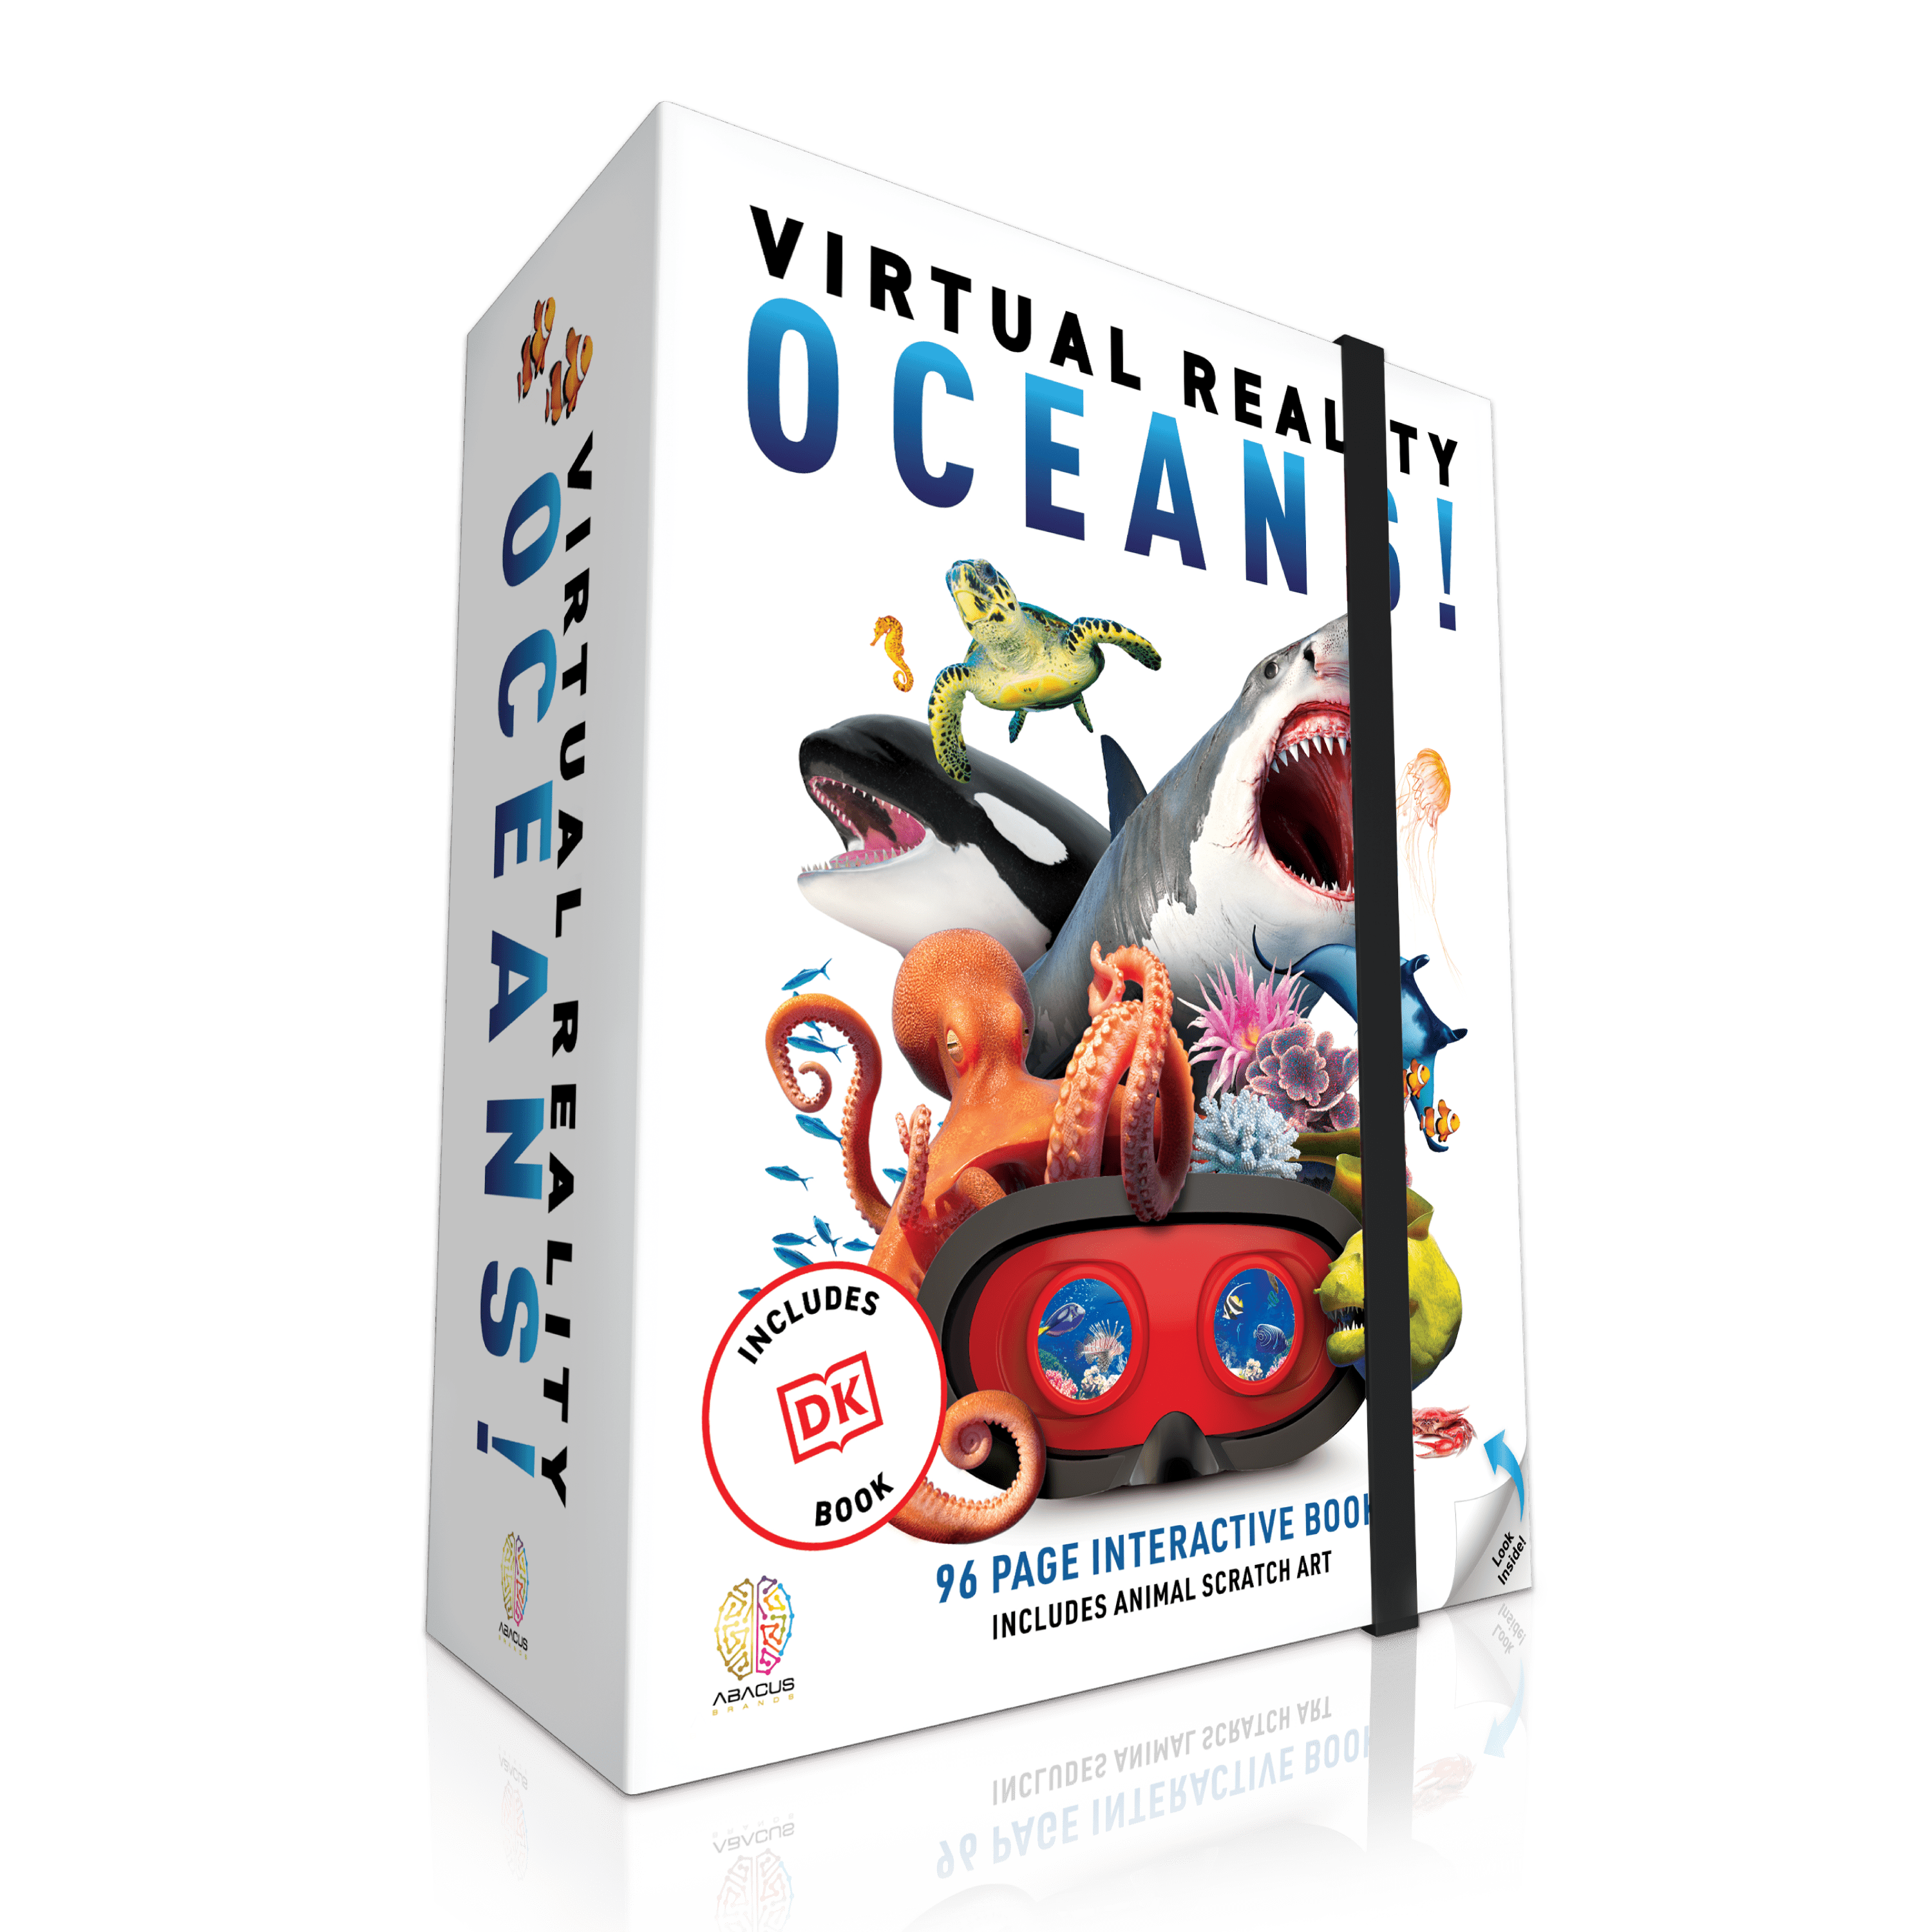 Virtual Reality Discovery Gift Set w/ DK Book - Oceans!